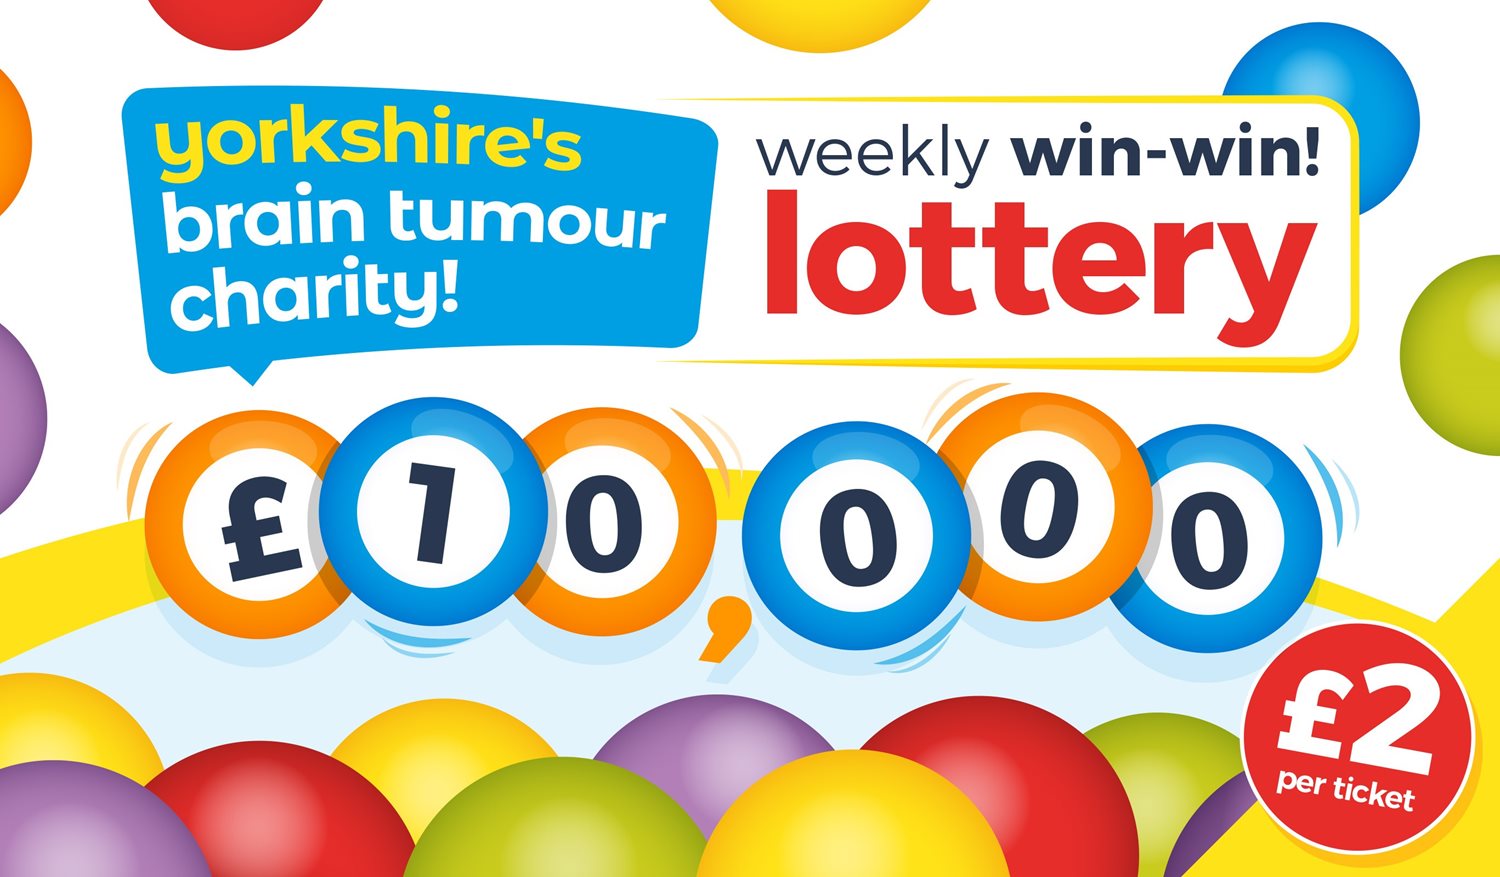 Win £10,000 in our new weekly lottery!